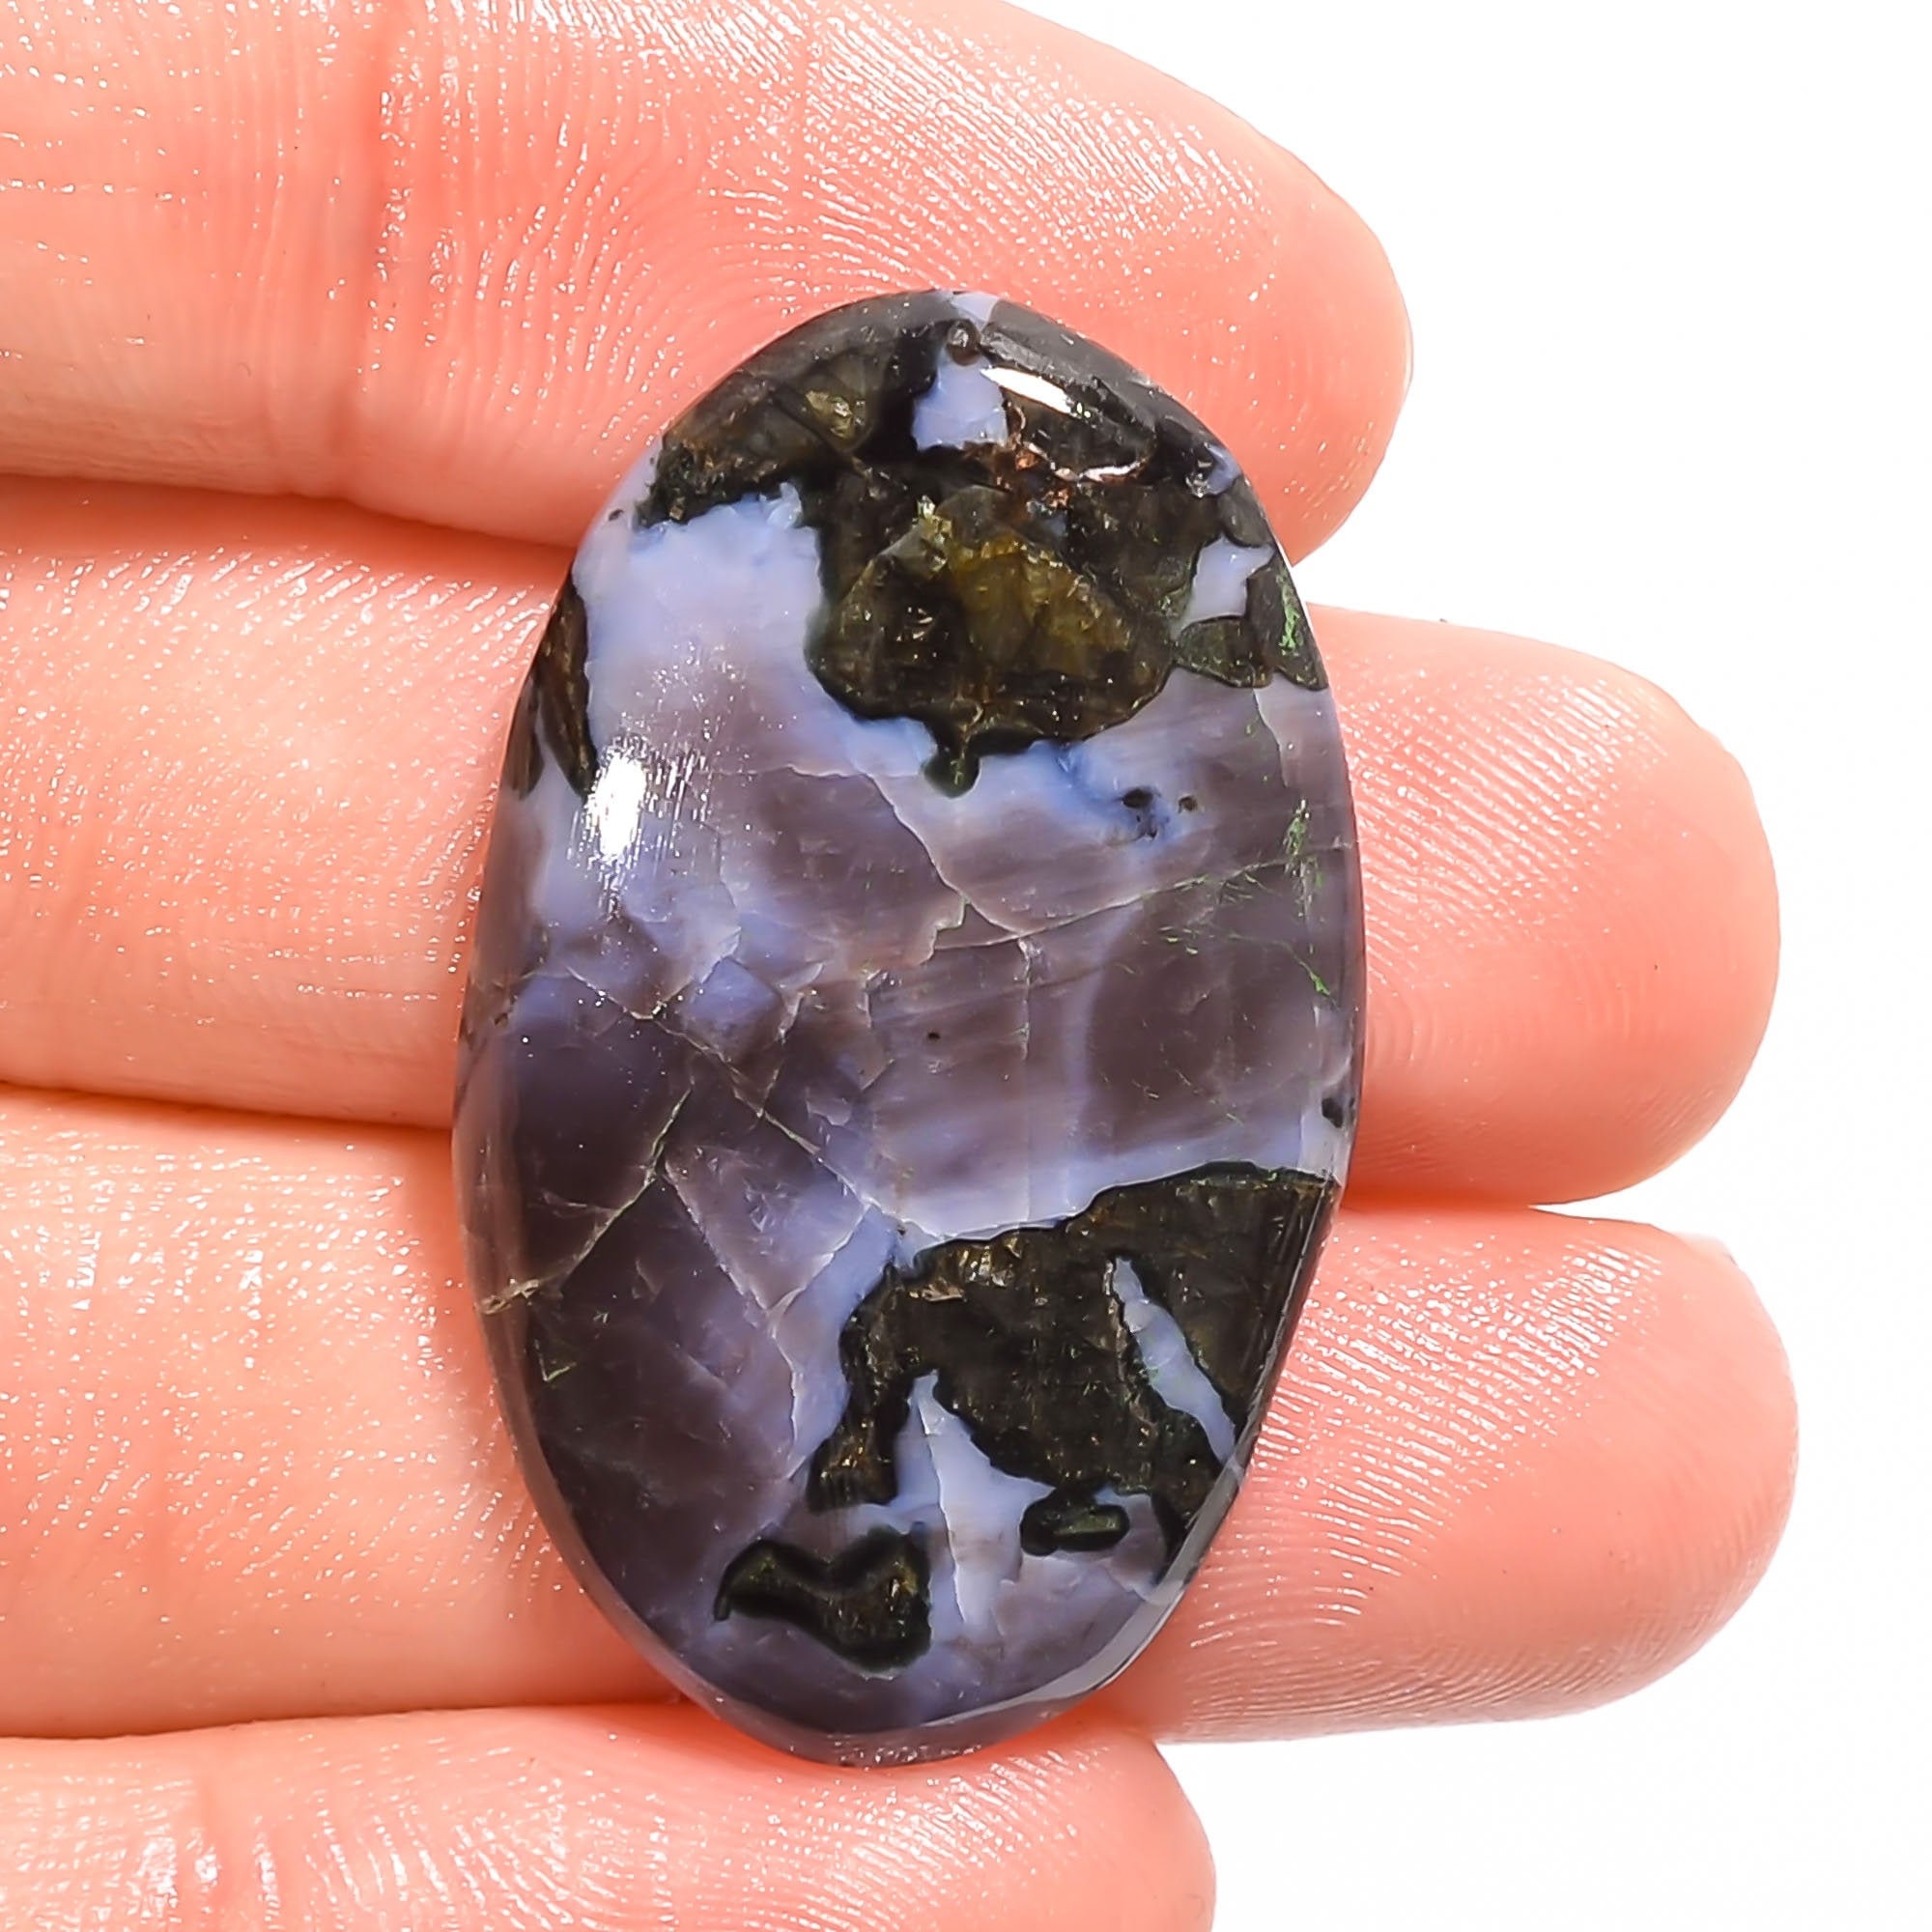 31X24X6 mm A-996 Unique Top Grade Quality 100% Natural Gabbro Jasper Oval Shape Cabochon Loose Gemstone For Making Jewelry 41 Ct